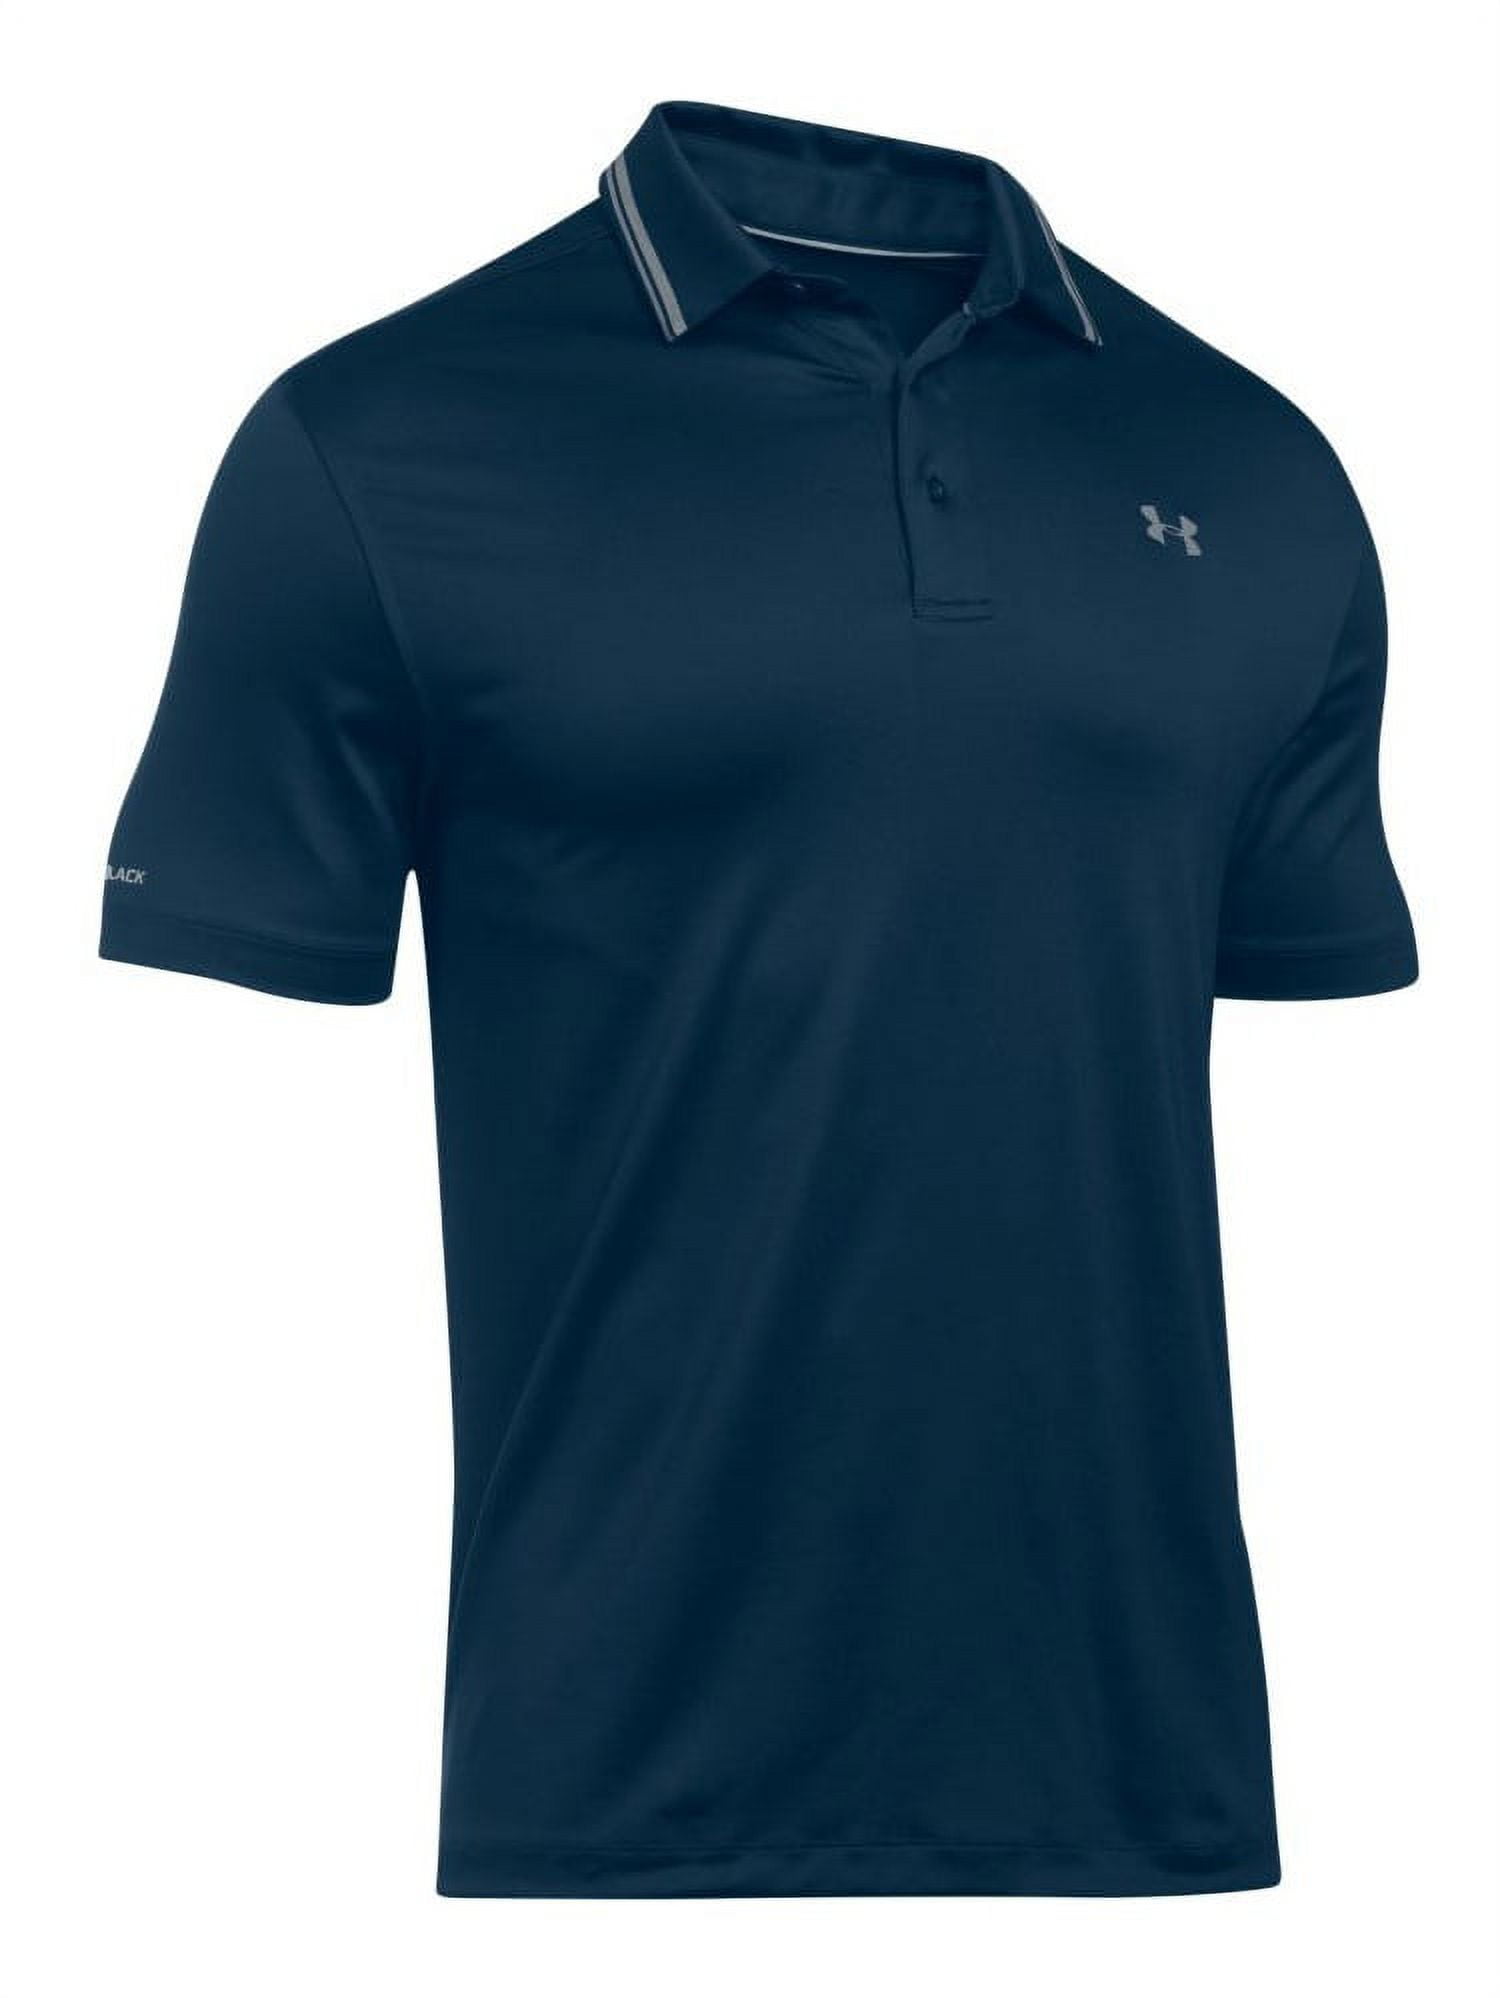 Under Armour Men's Playoff 3.0 Long Sleeve Polo - Green, MD